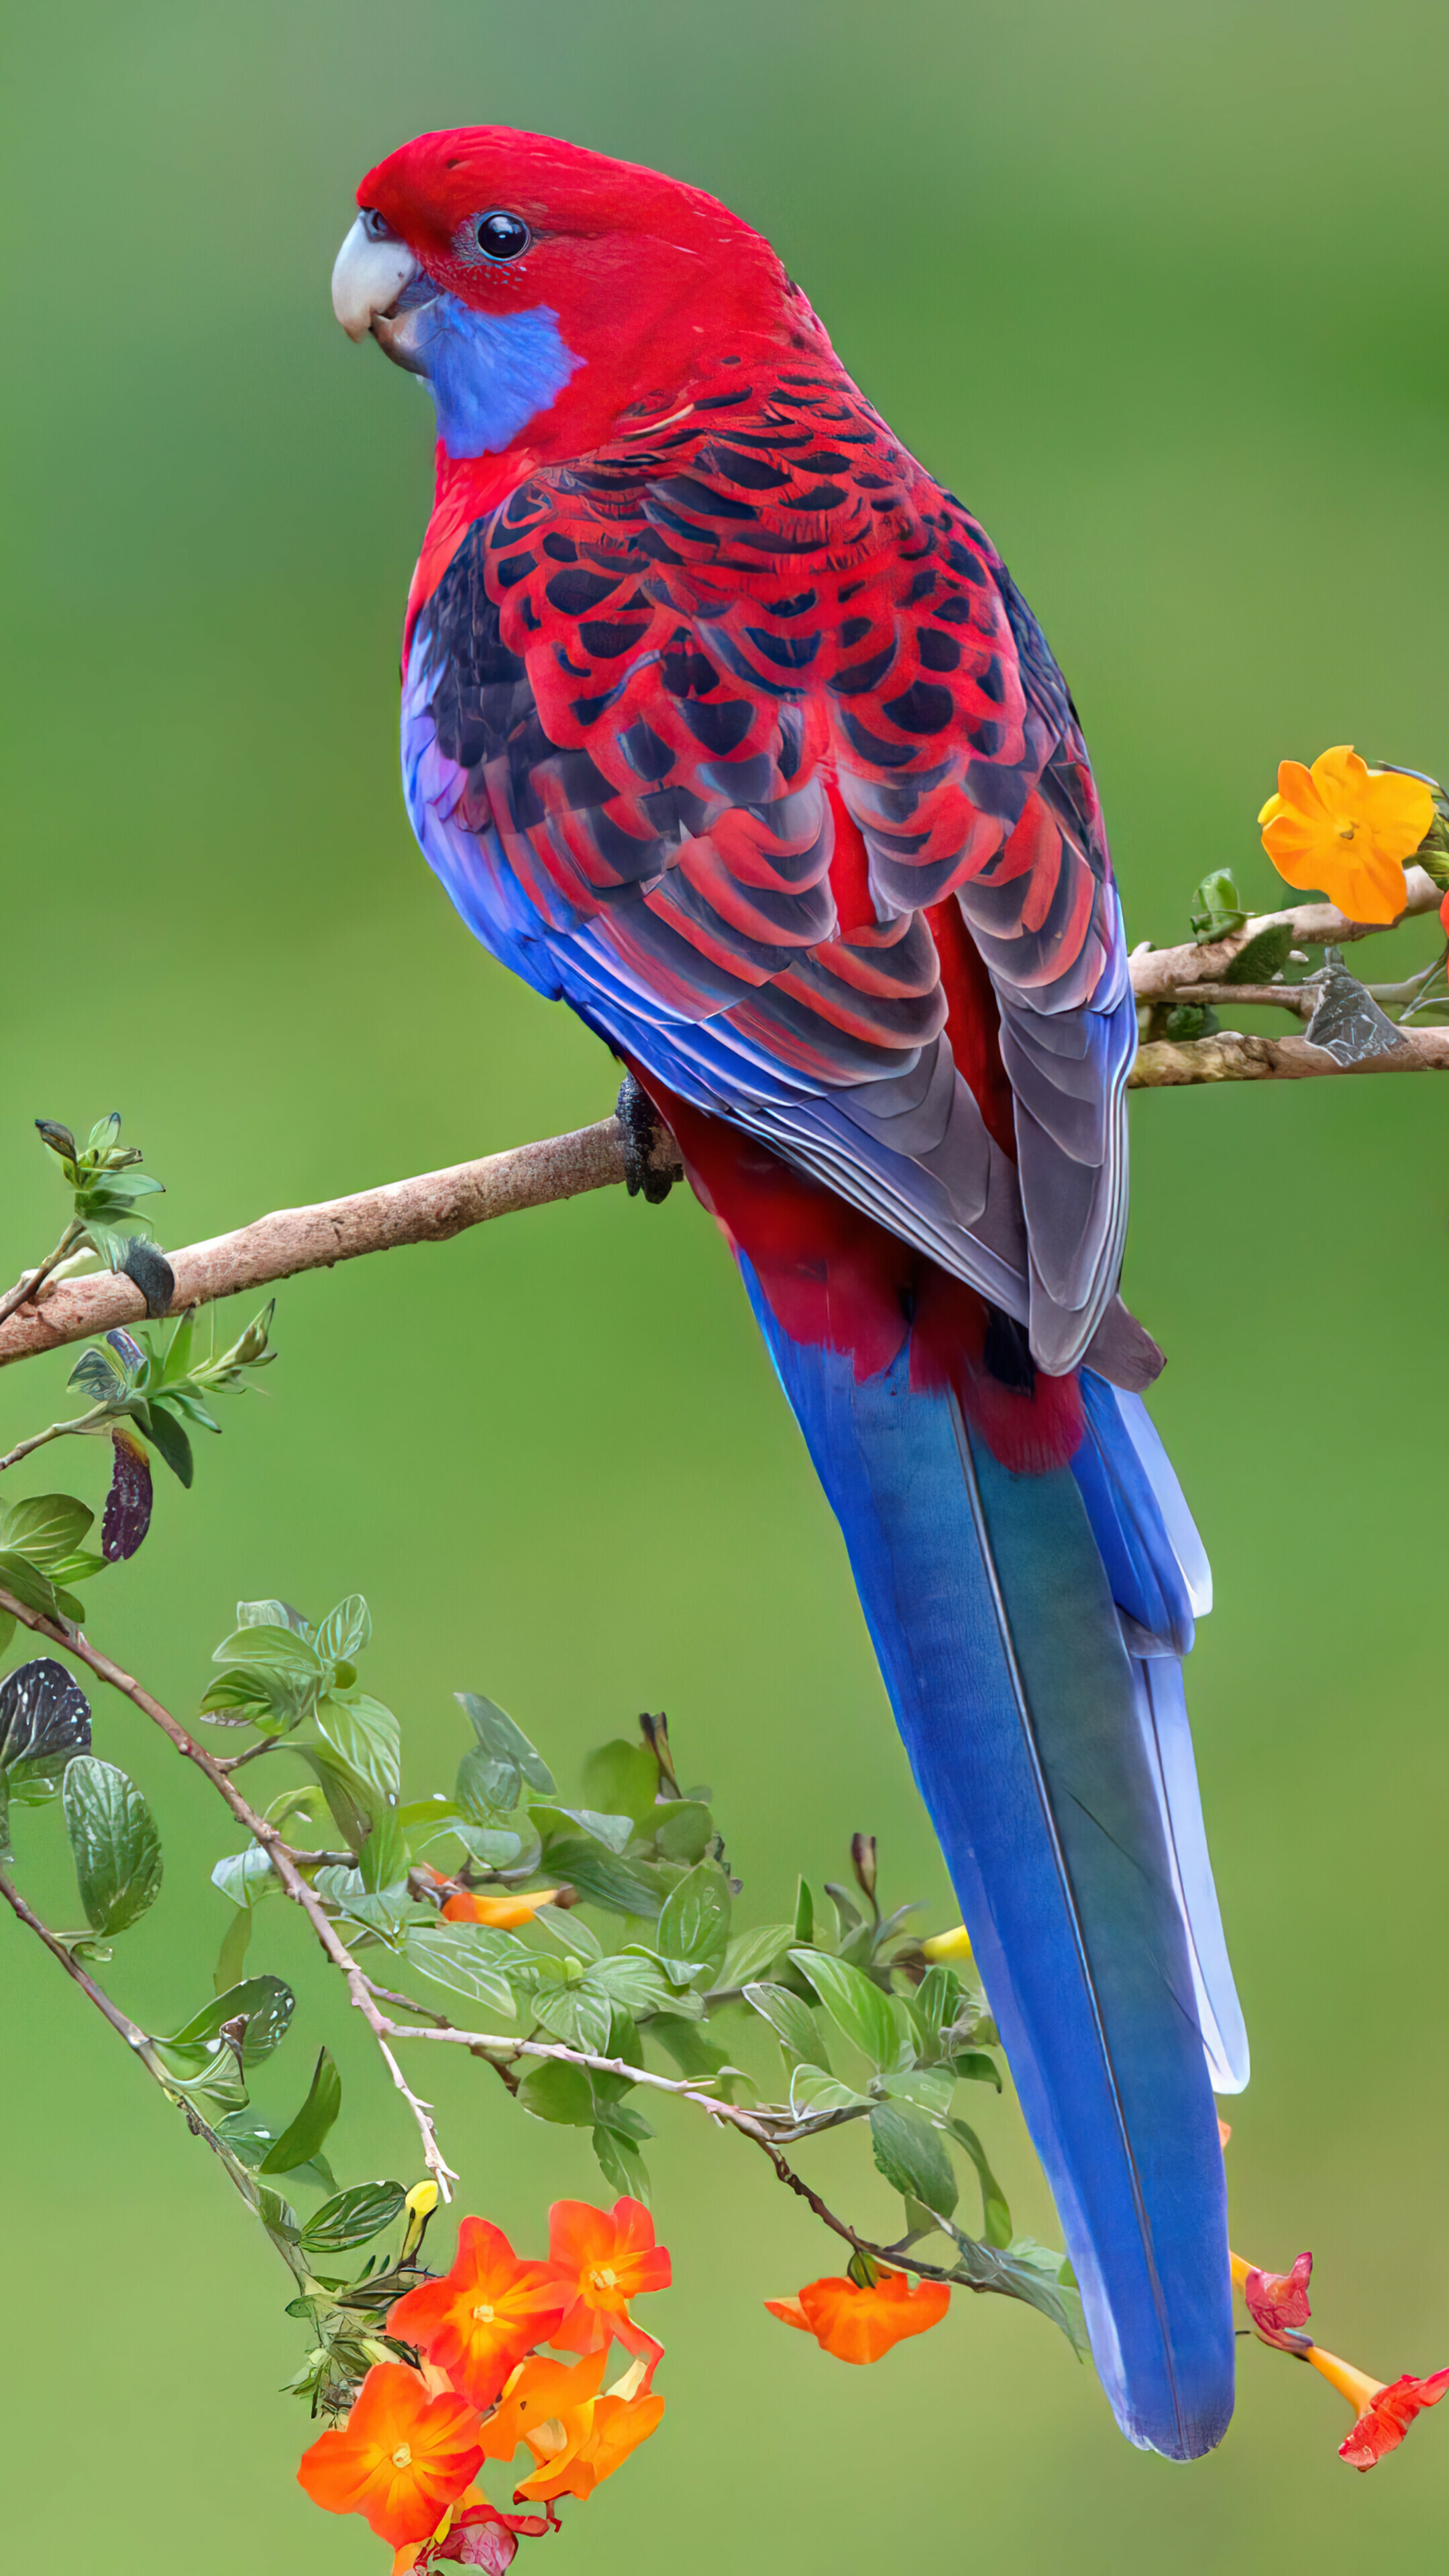 Bird: Parrot, A group of warm-blooded vertebrates constituting the class Aves. 2160x3840 4K Wallpaper.